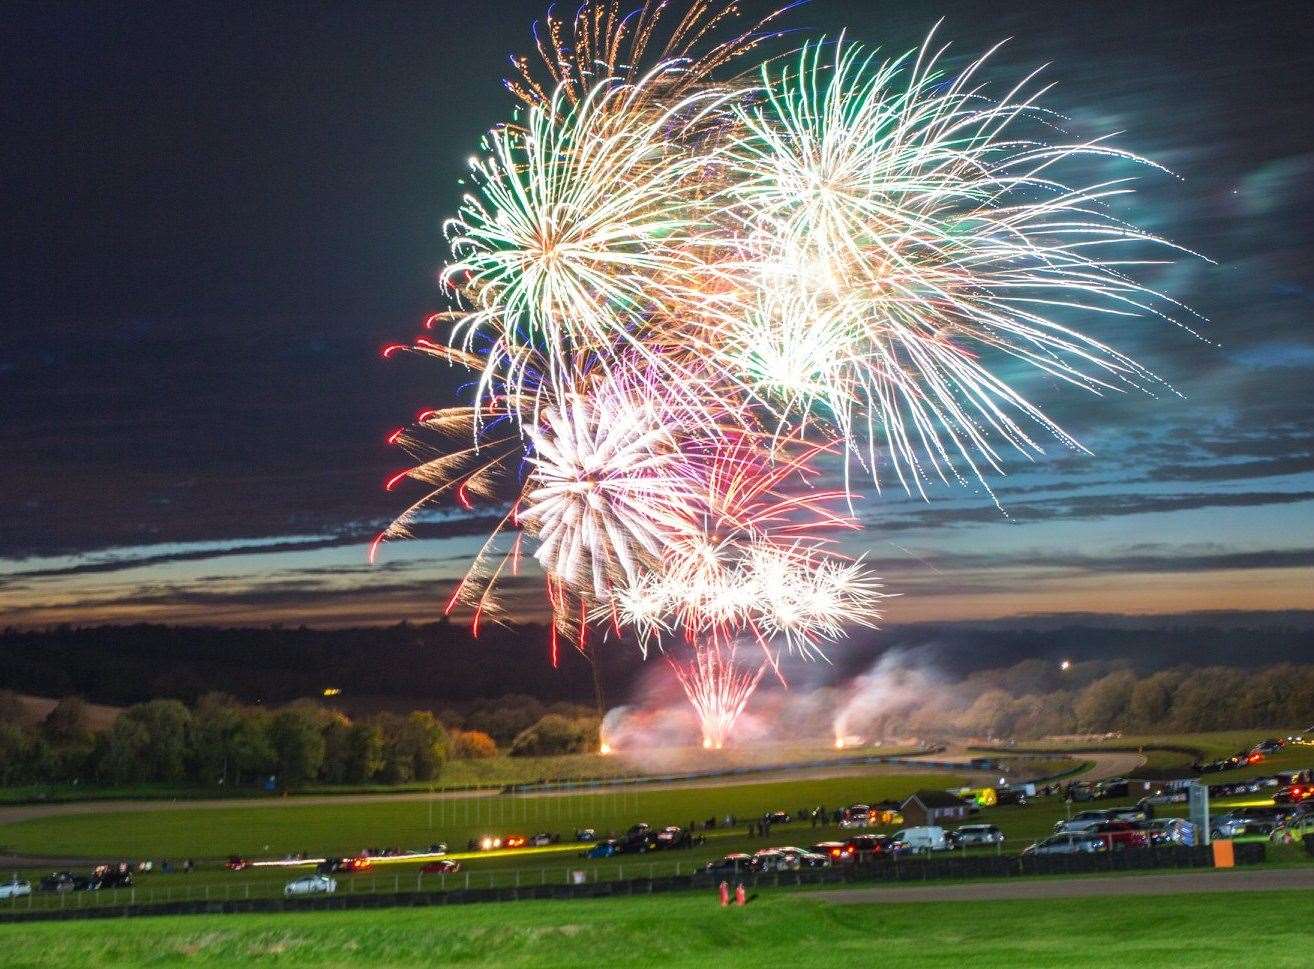 A firework display will be held on Saturday evening